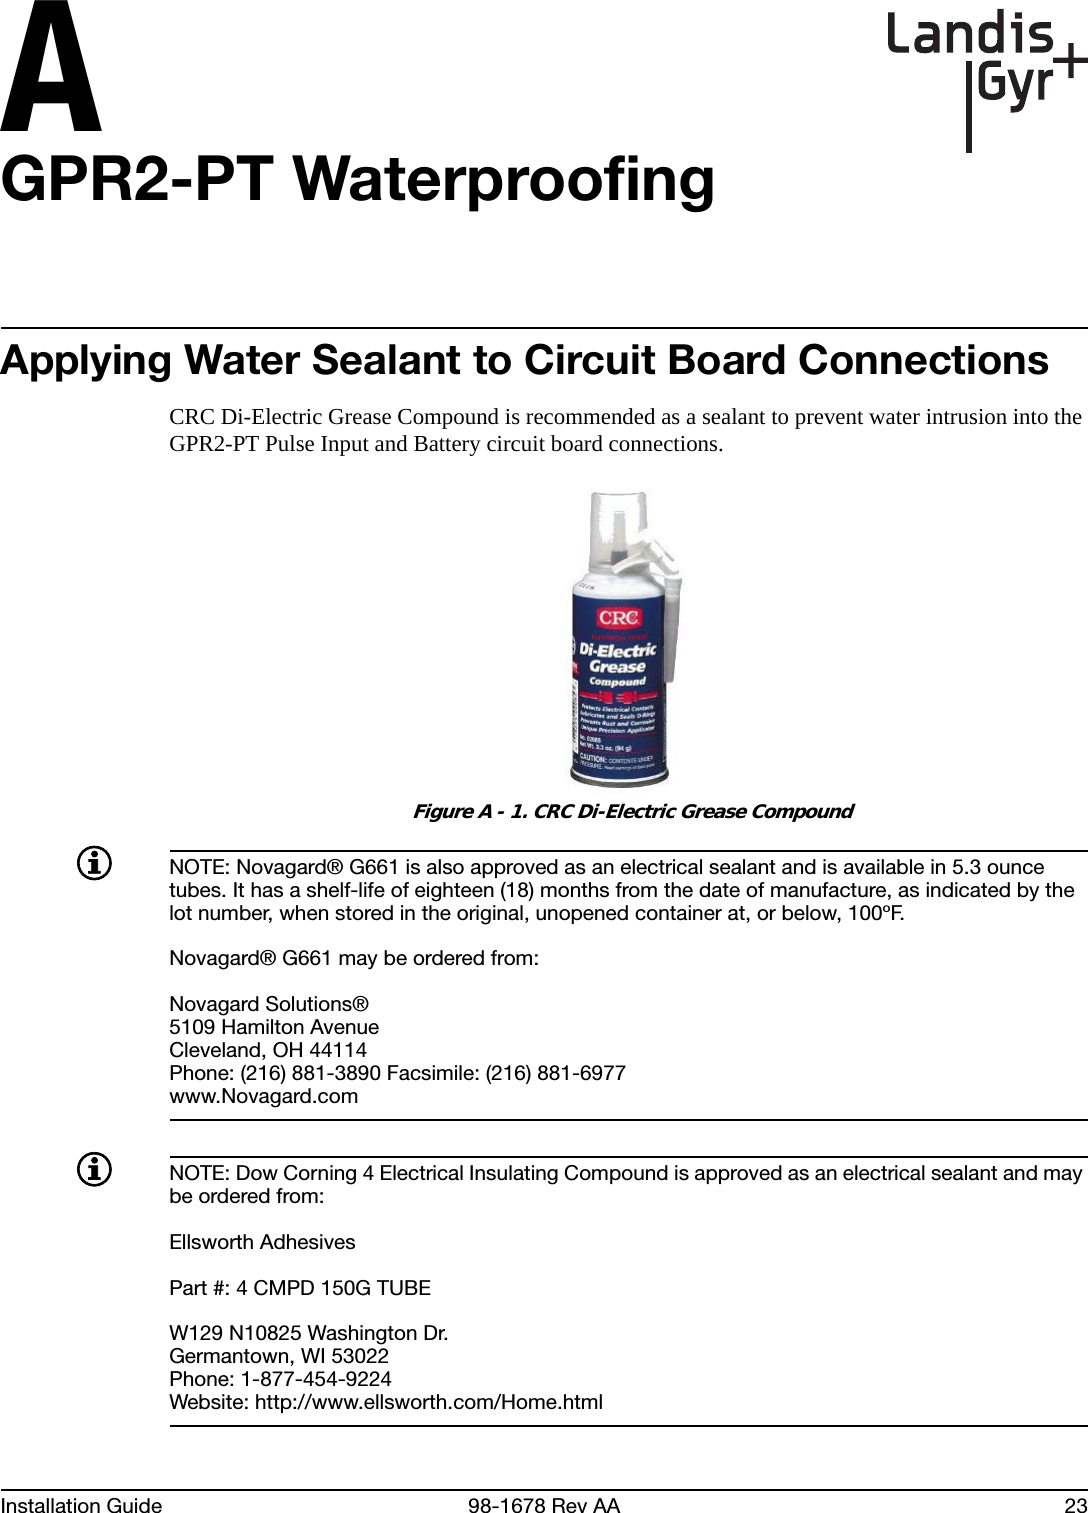 AInstallation Guide 98-1678 Rev AA 23GPR2-PT WaterproofingApplying Water Sealant to Circuit Board ConnectionsCRC Di-Electric Grease Compound is recommended as a sealant to prevent water intrusion into the GPR2-PT Pulse Input and Battery circuit board connections. Figure A - 1. CRC Di-Electric Grease CompoundNOTE: Novagard® G661 is also approved as an electrical sealant and is available in 5.3 ounce tubes. It has a shelf-life of eighteen (18) months from the date of manufacture, as indicated by the lot number, when stored in the original, unopened container at, or below, 100ºF.Novagard® G661 may be ordered from:Novagard Solutions®5109 Hamilton AvenueCleveland, OH 44114Phone: (216) 881-3890 Facsimile: (216) 881-6977www.Novagard.comNOTE: Dow Corning 4 Electrical Insulating Compound is approved as an electrical sealant and may be ordered from:Ellsworth AdhesivesPart #: 4 CMPD 150G TUBEW129 N10825 Washington Dr.Germantown, WI 53022Phone: 1-877-454-9224Website: http://www.ellsworth.com/Home.html